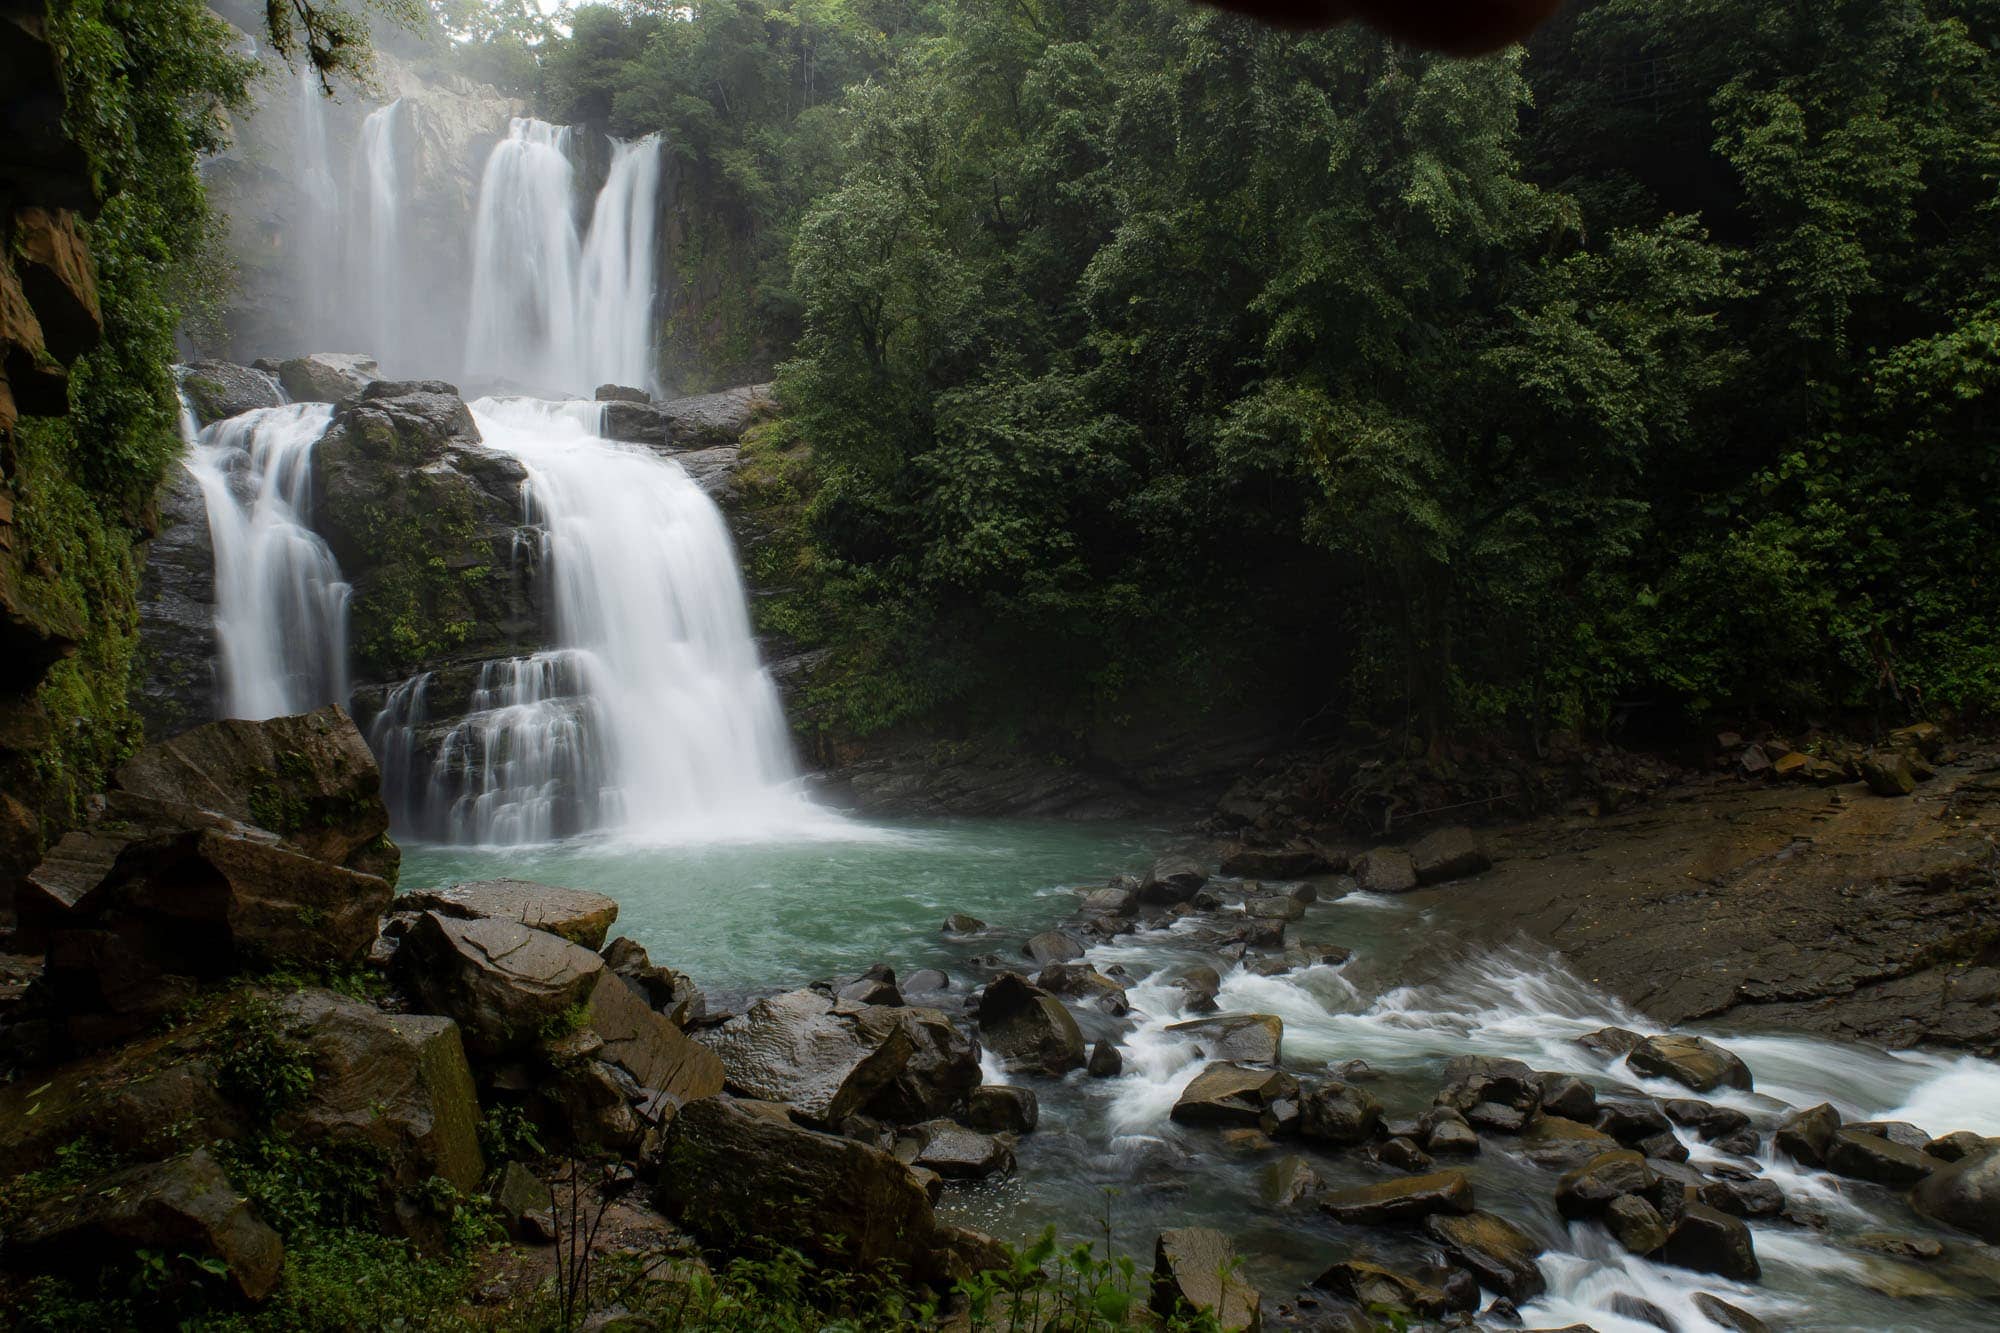 View of waterfall from the other side of the river